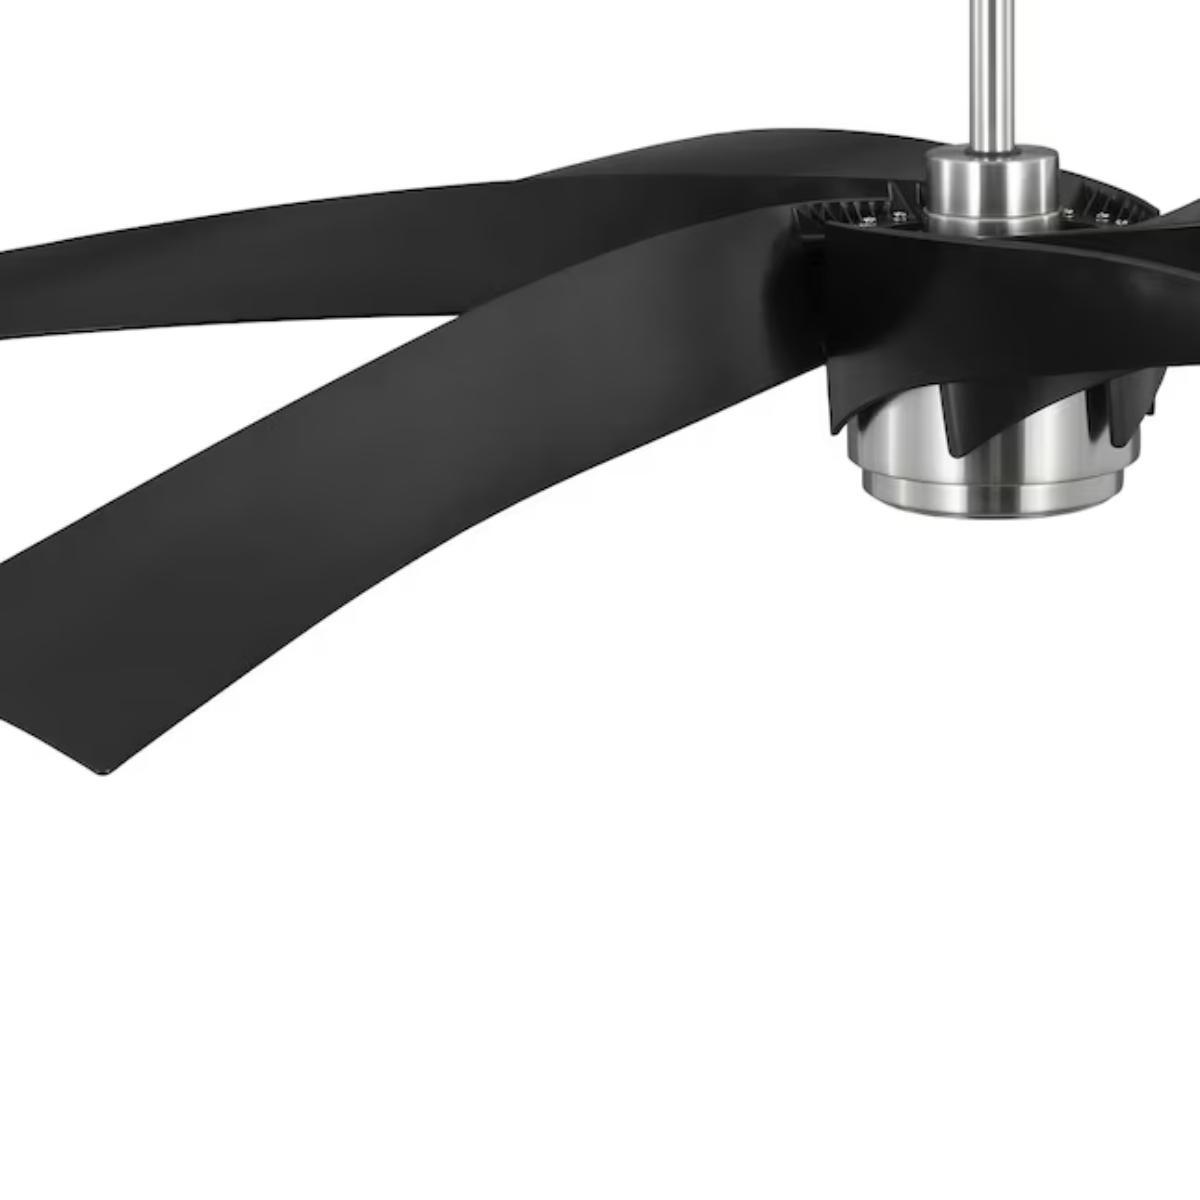 Insigna 72 Inch LED Ceiling Fan with Light Kit and Remote, Brushed Nickel with Matte Black Blades - Bees Lighting